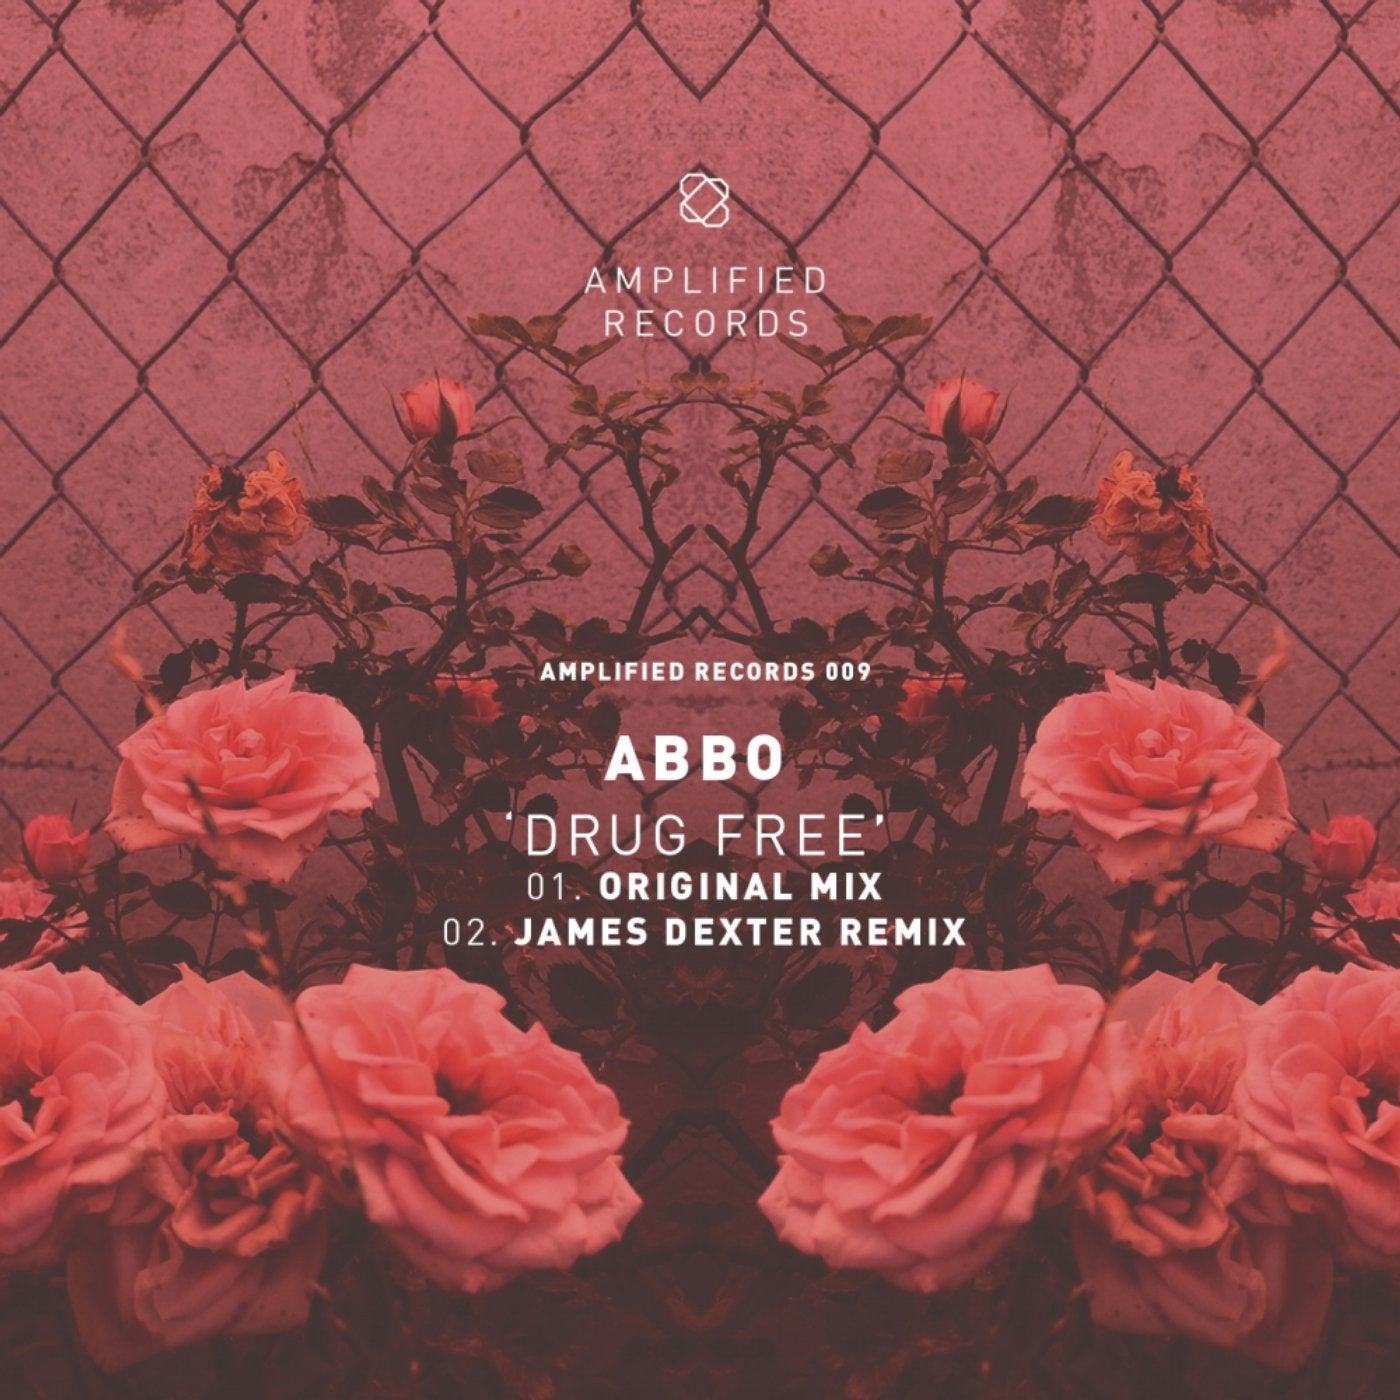 Abbo. Amplifier record Ep 2017. Amplified. Абос читать. James flac